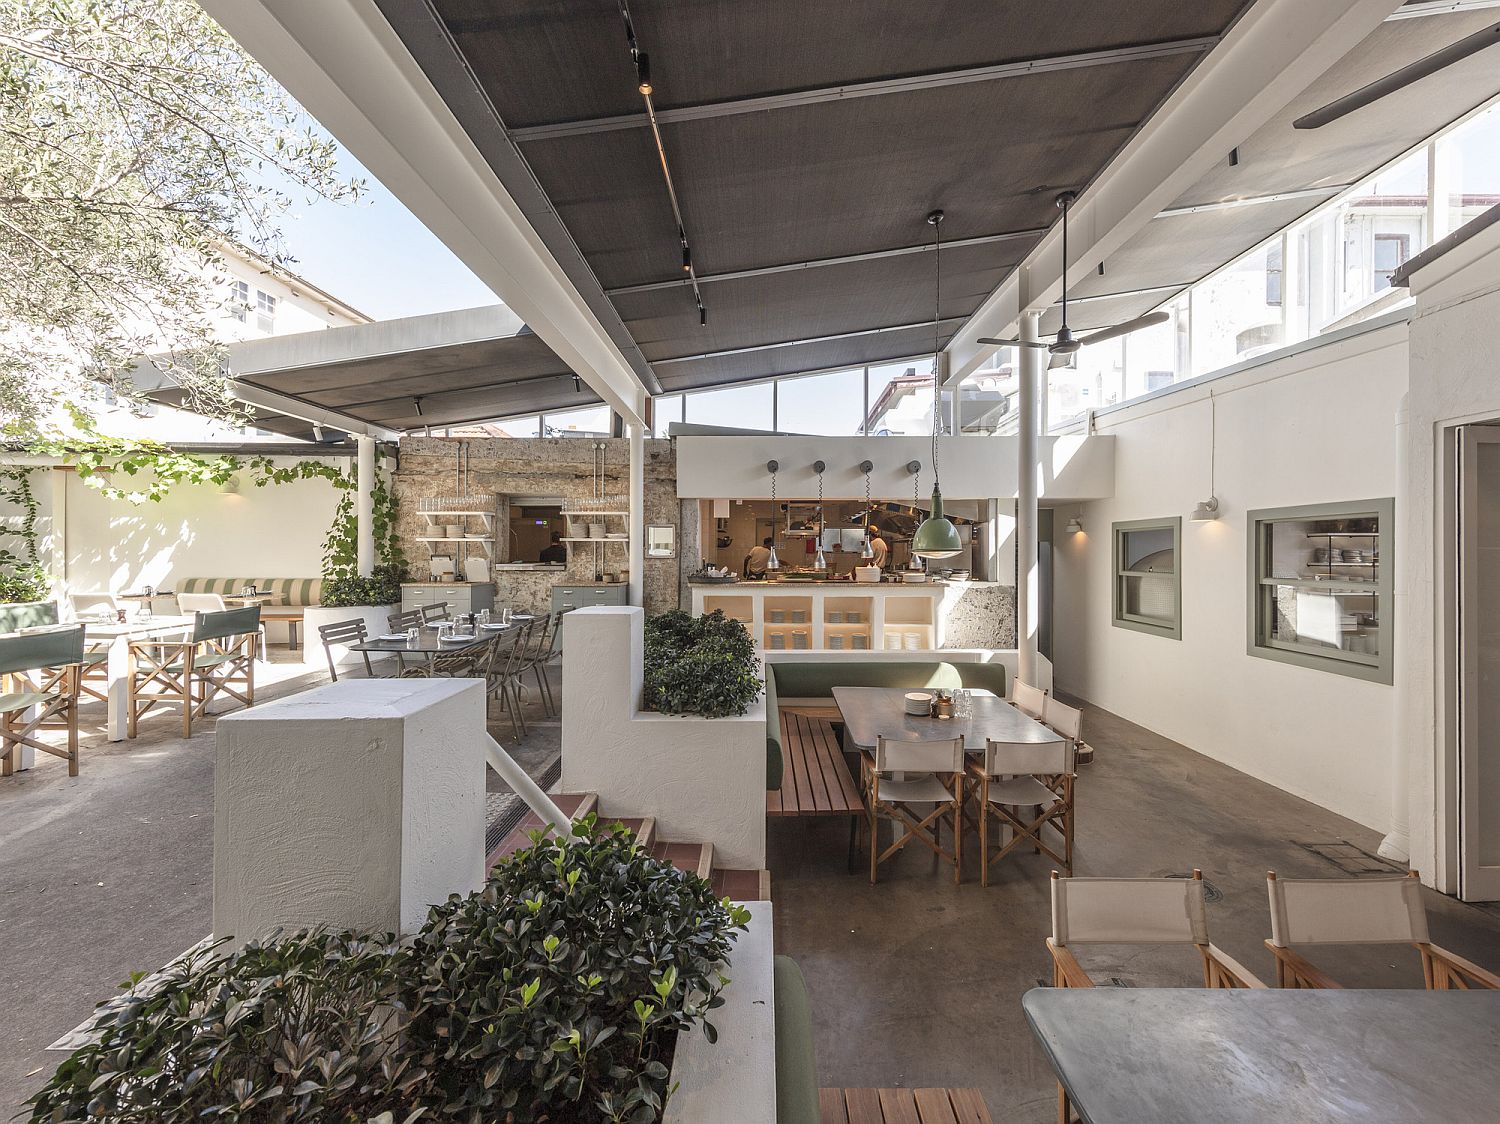 Totti’s courtyard adds greenery to the setting